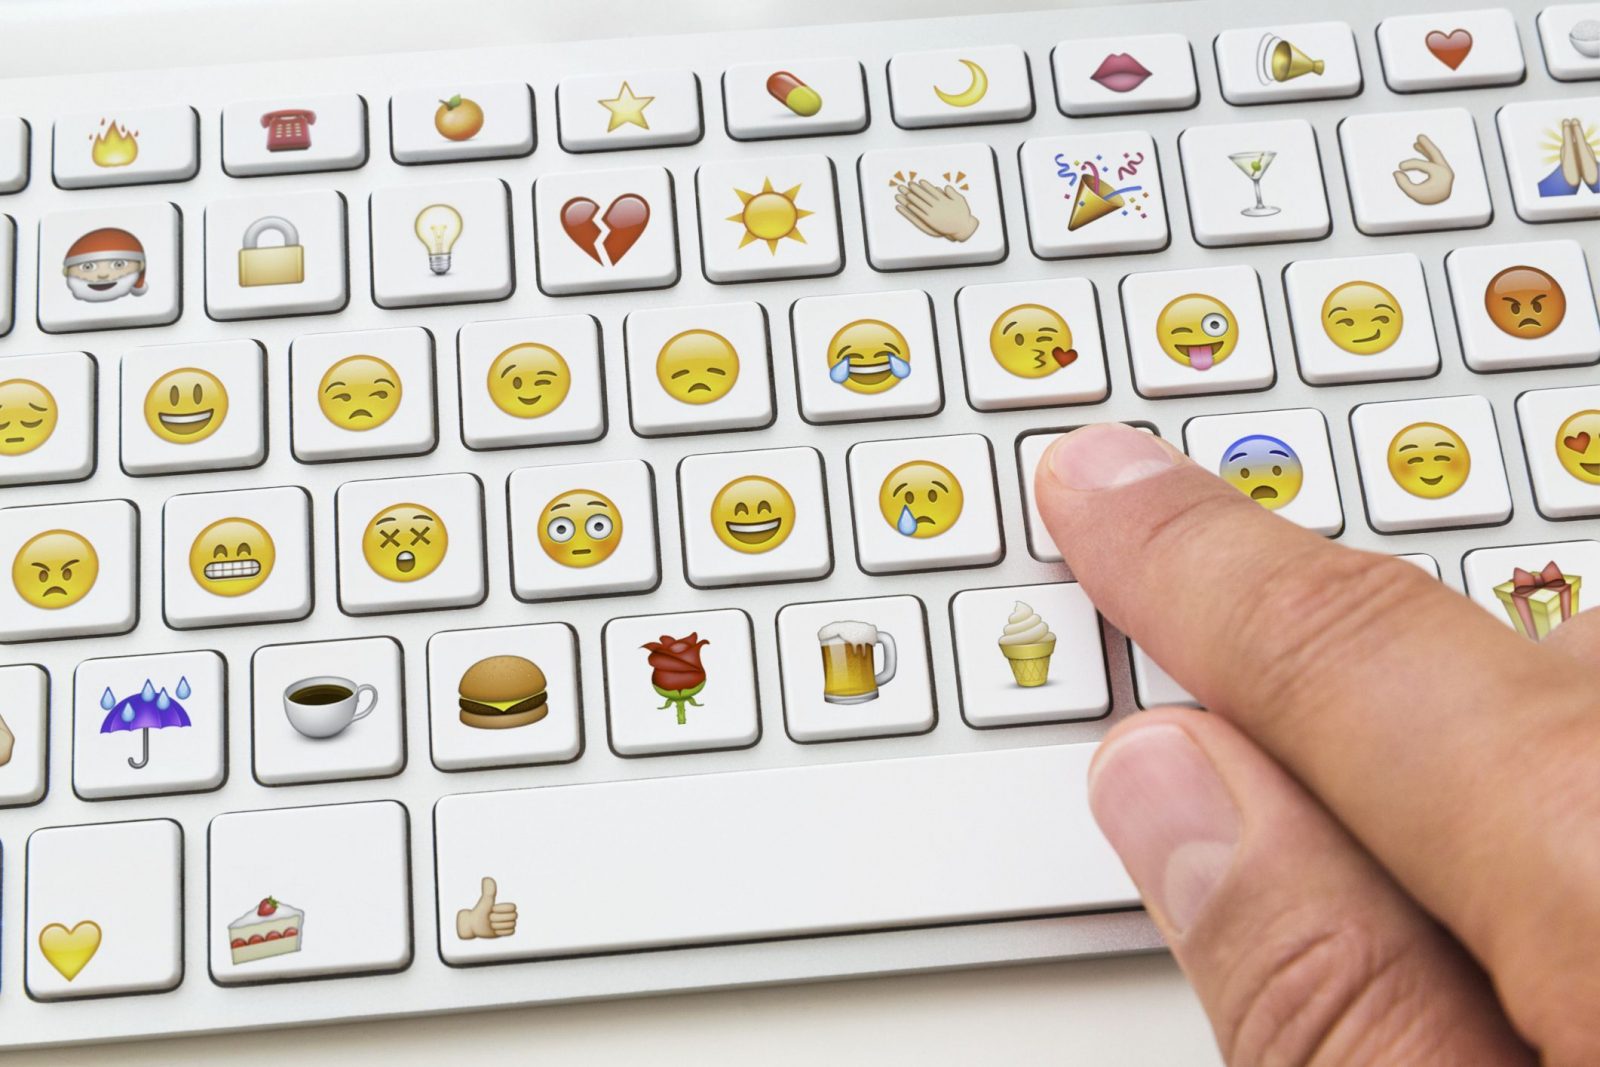 ❤ Can We Correctly Guess Your Relationship Status? emoji keyboard